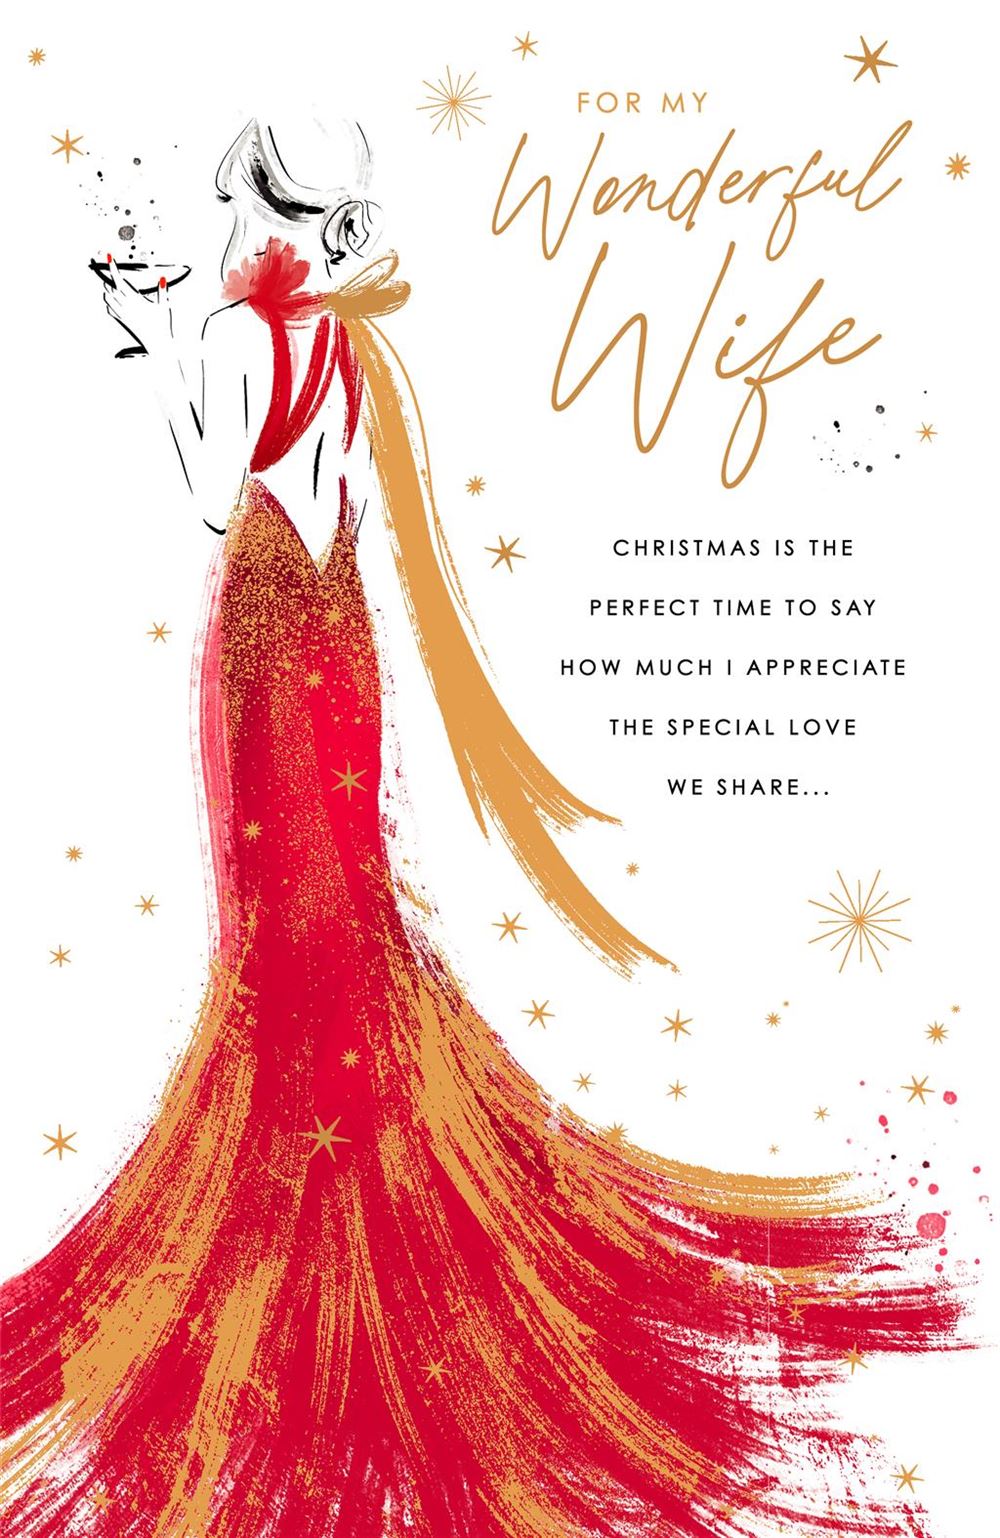 Wife Christmas Card - Lady in Red